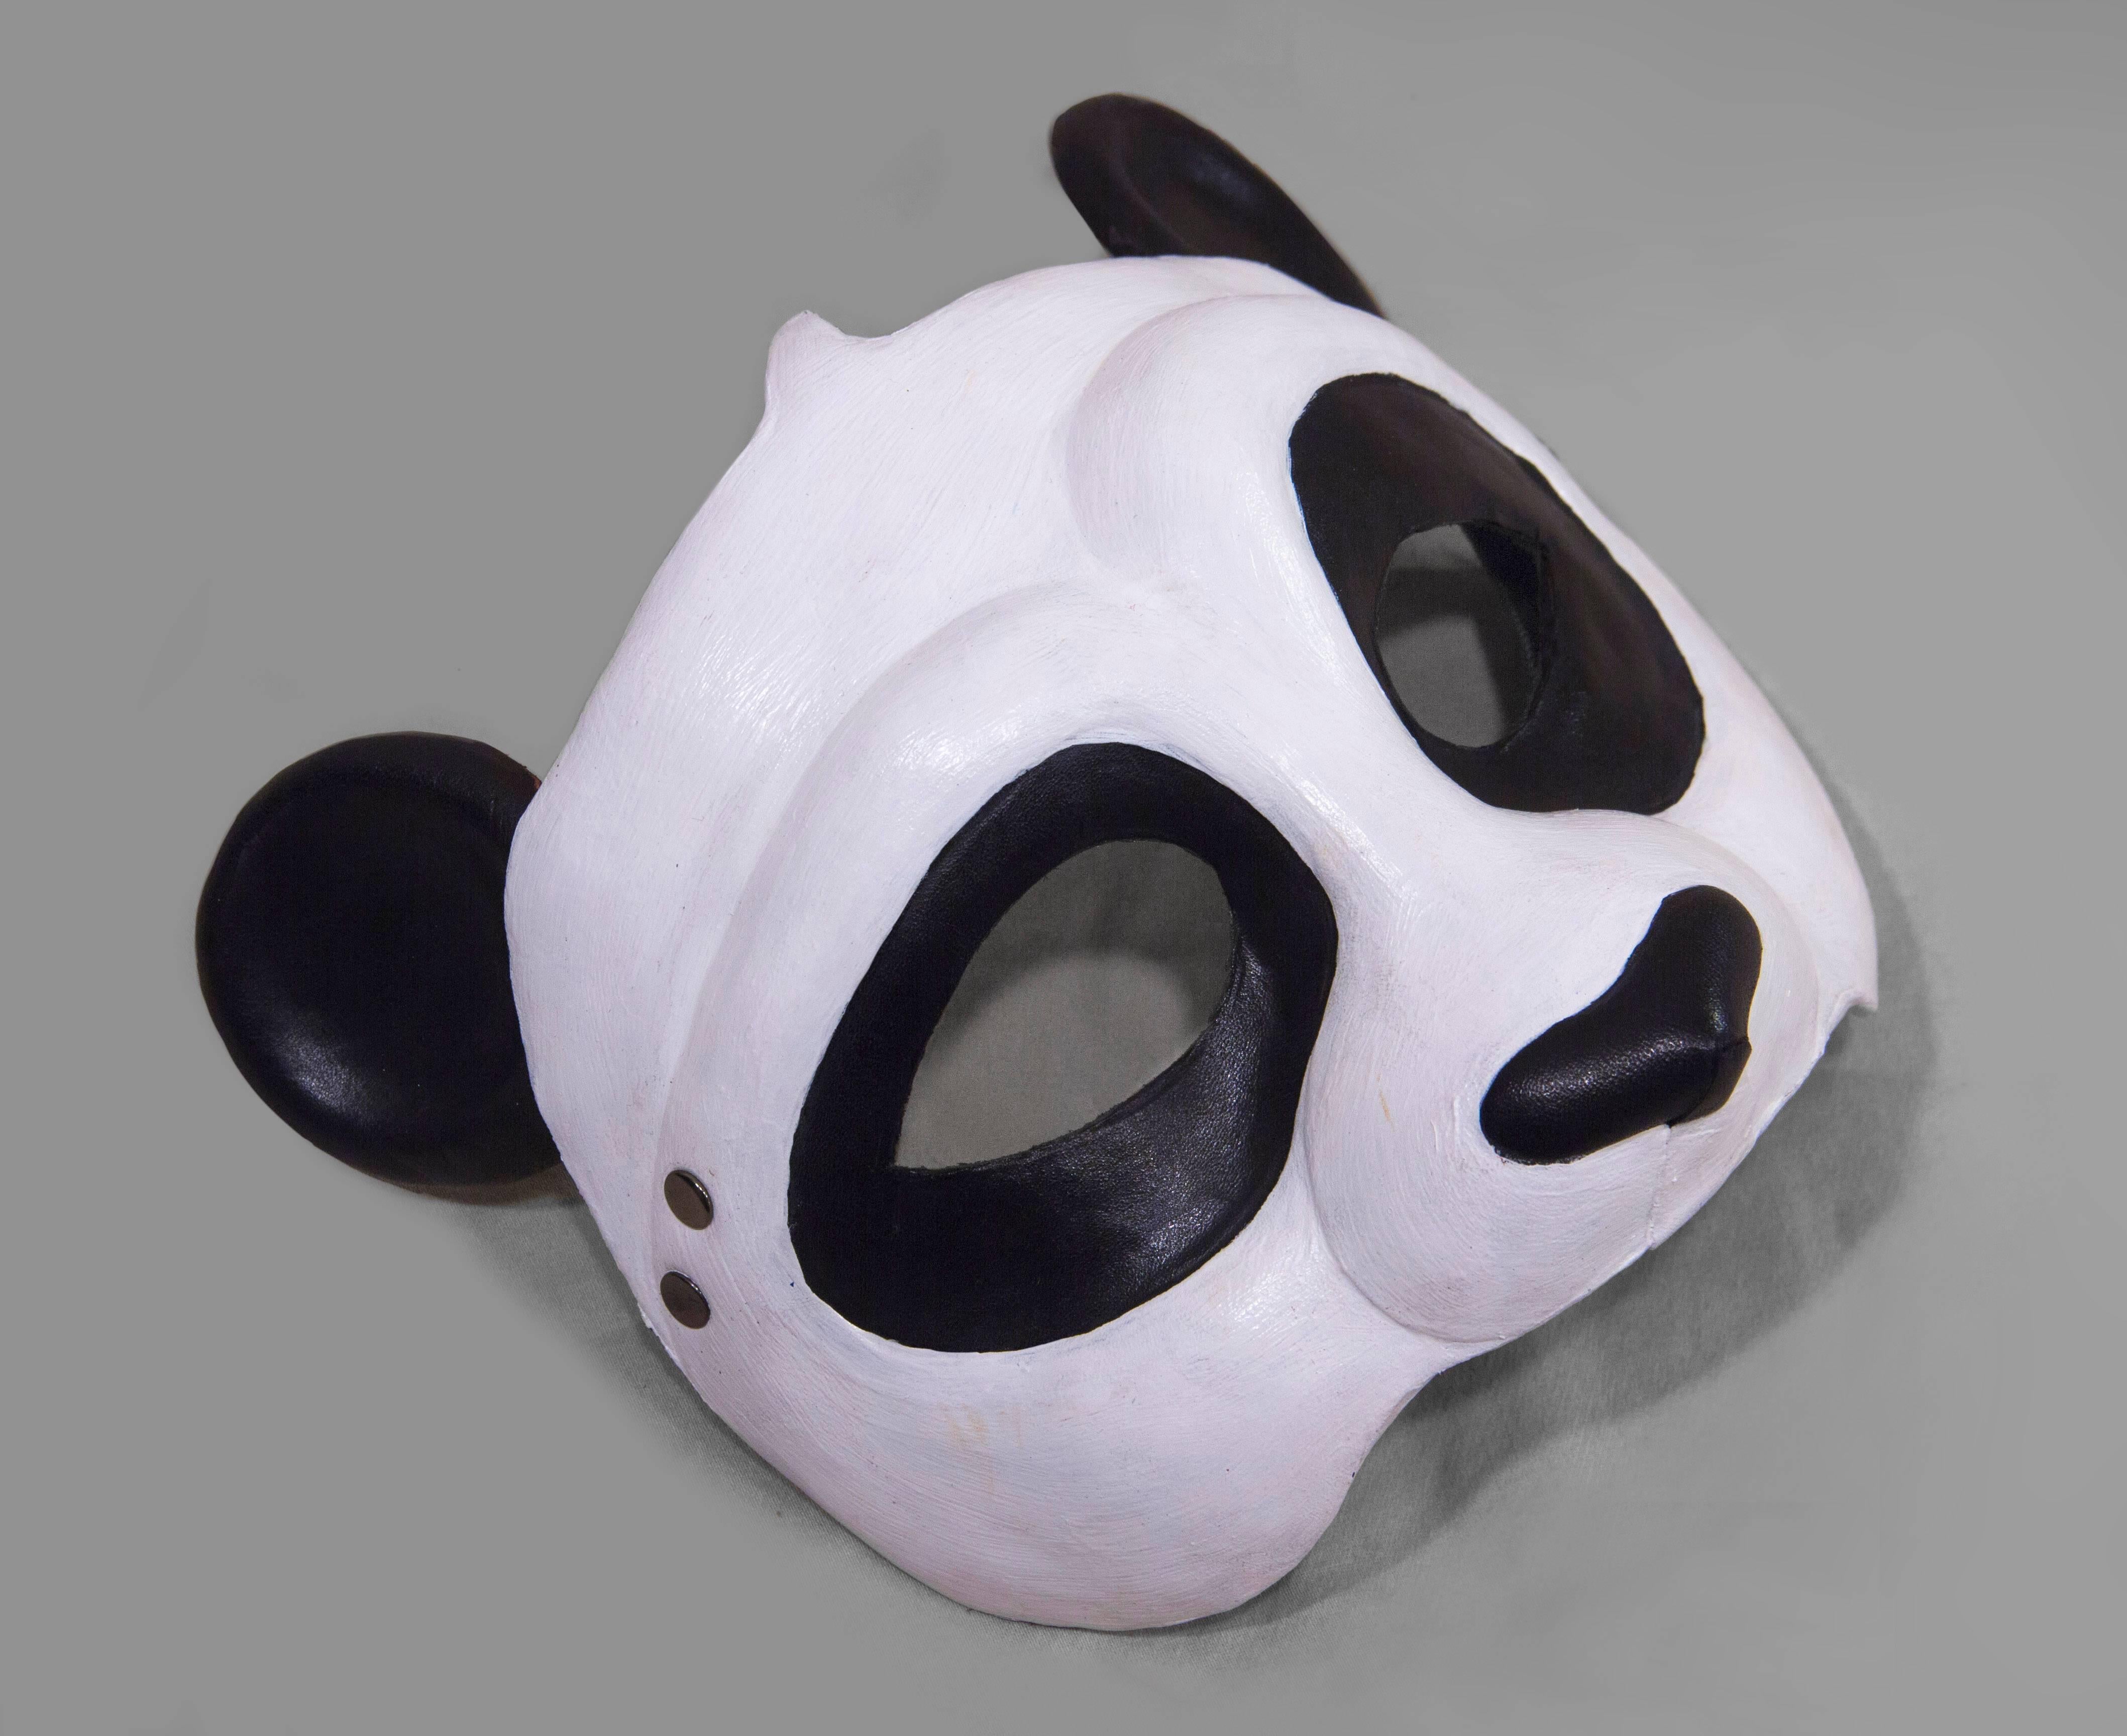 Inspired by the fanciful, playful panda. This piece is wearable art, making it perfect for a masquerade, costume party, Halloween, or as a beautiful shelf or wall piece. The frame of the mask is adjustable, so you may adjust it to the shape of your